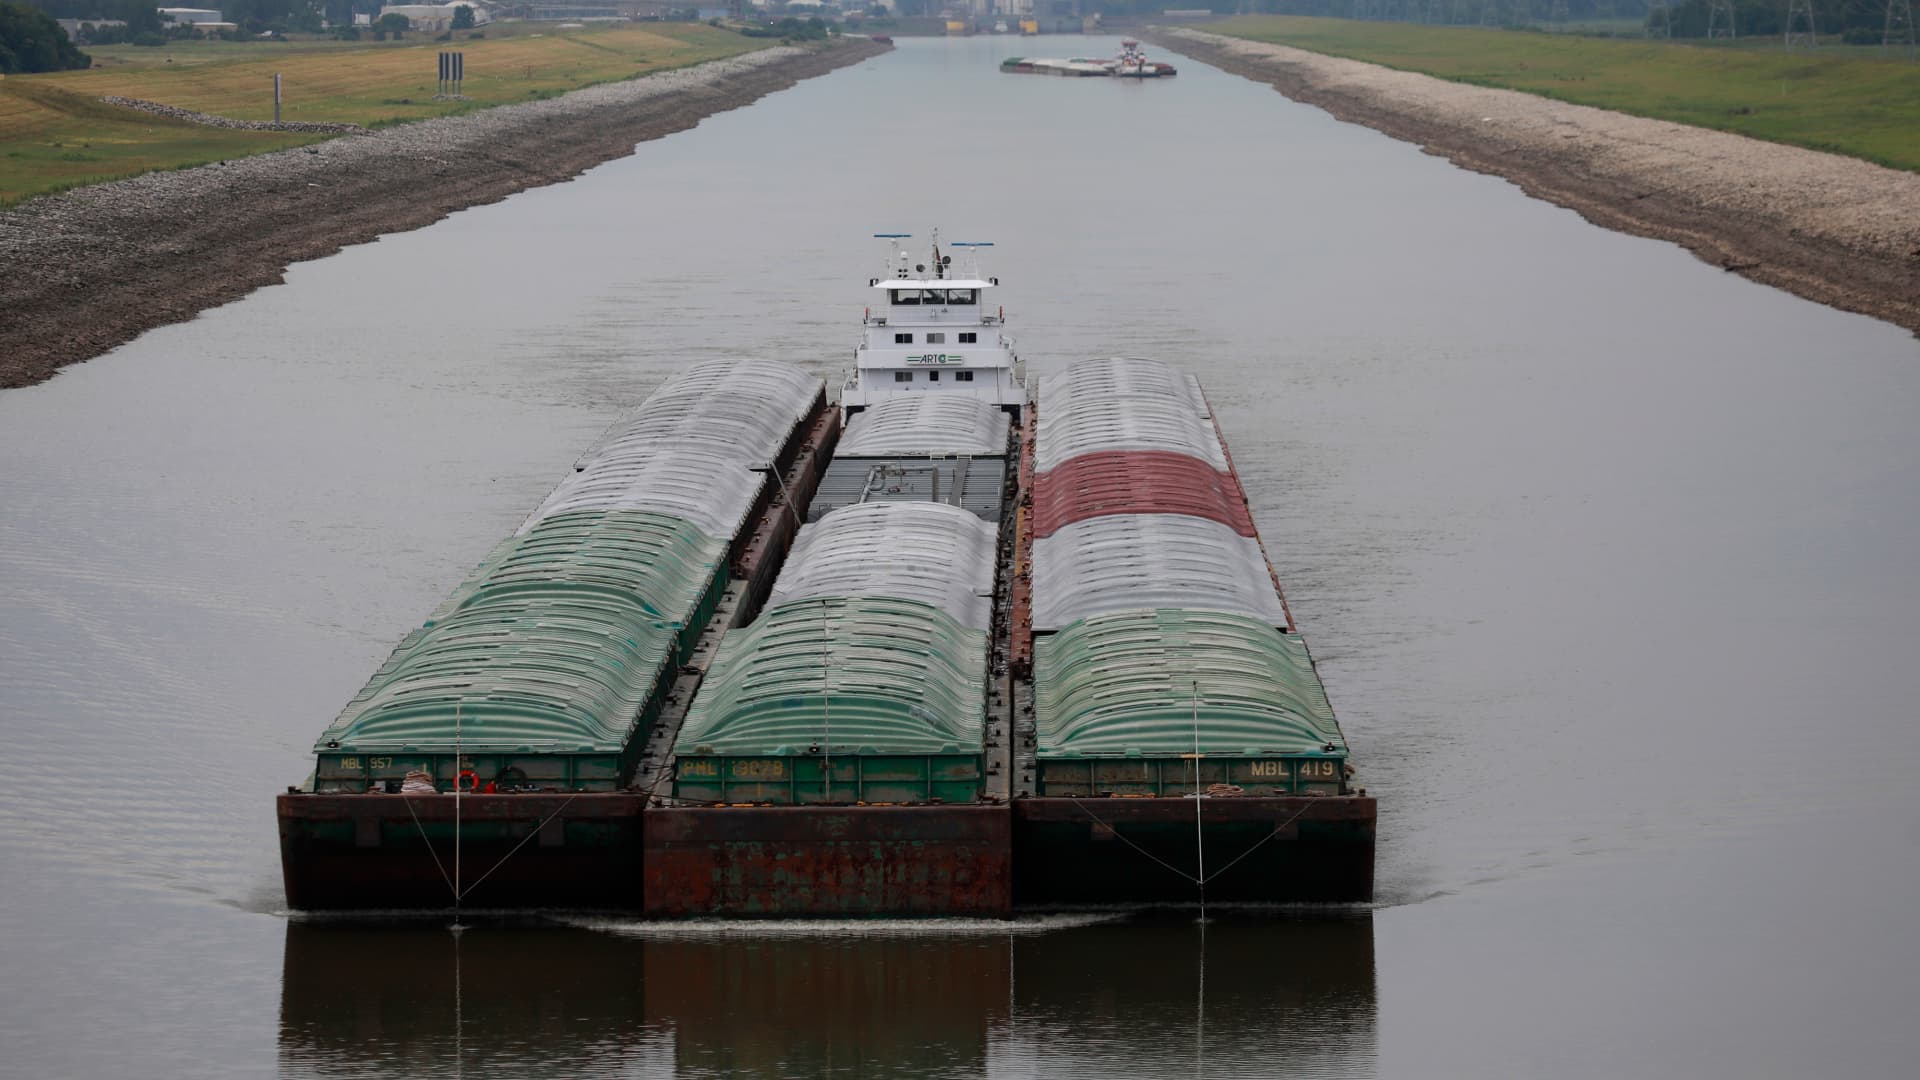 Mississippi River water woes, retail overstock trailers: Latest supply chain stresses for economy